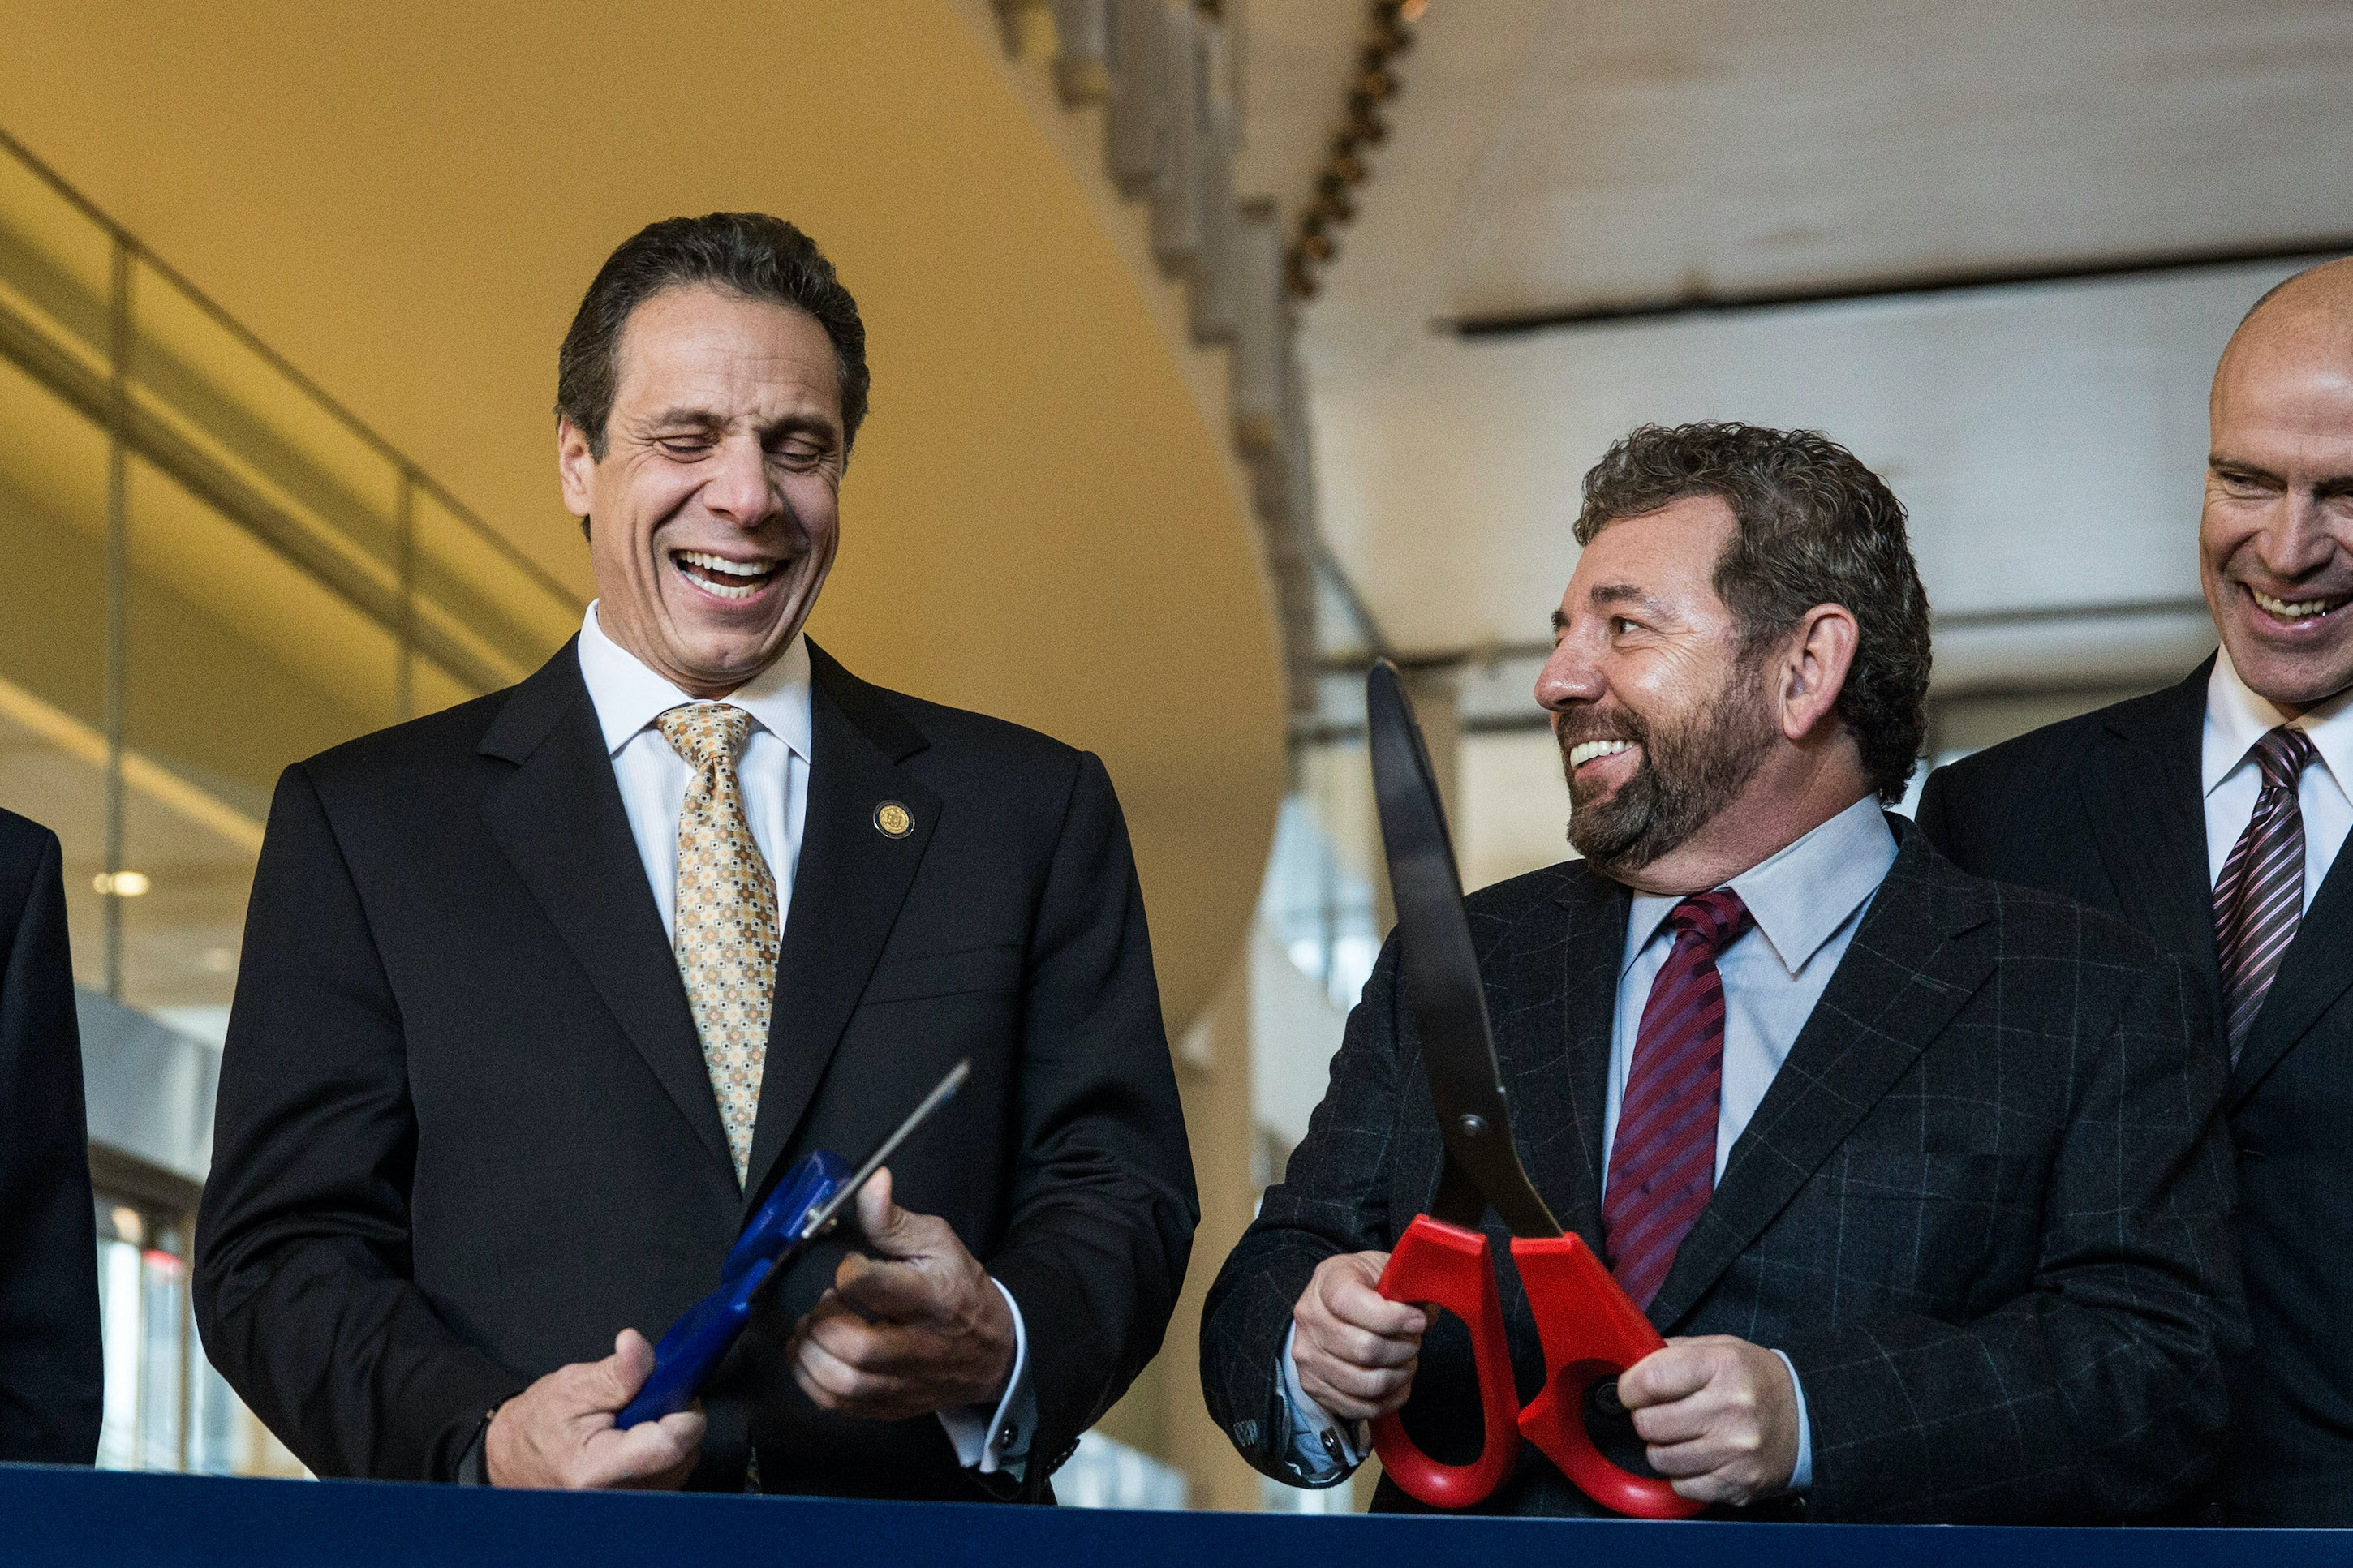 Governor Andrew Cuomo cuts a ribbon with New York Knicks owner James Dolan.